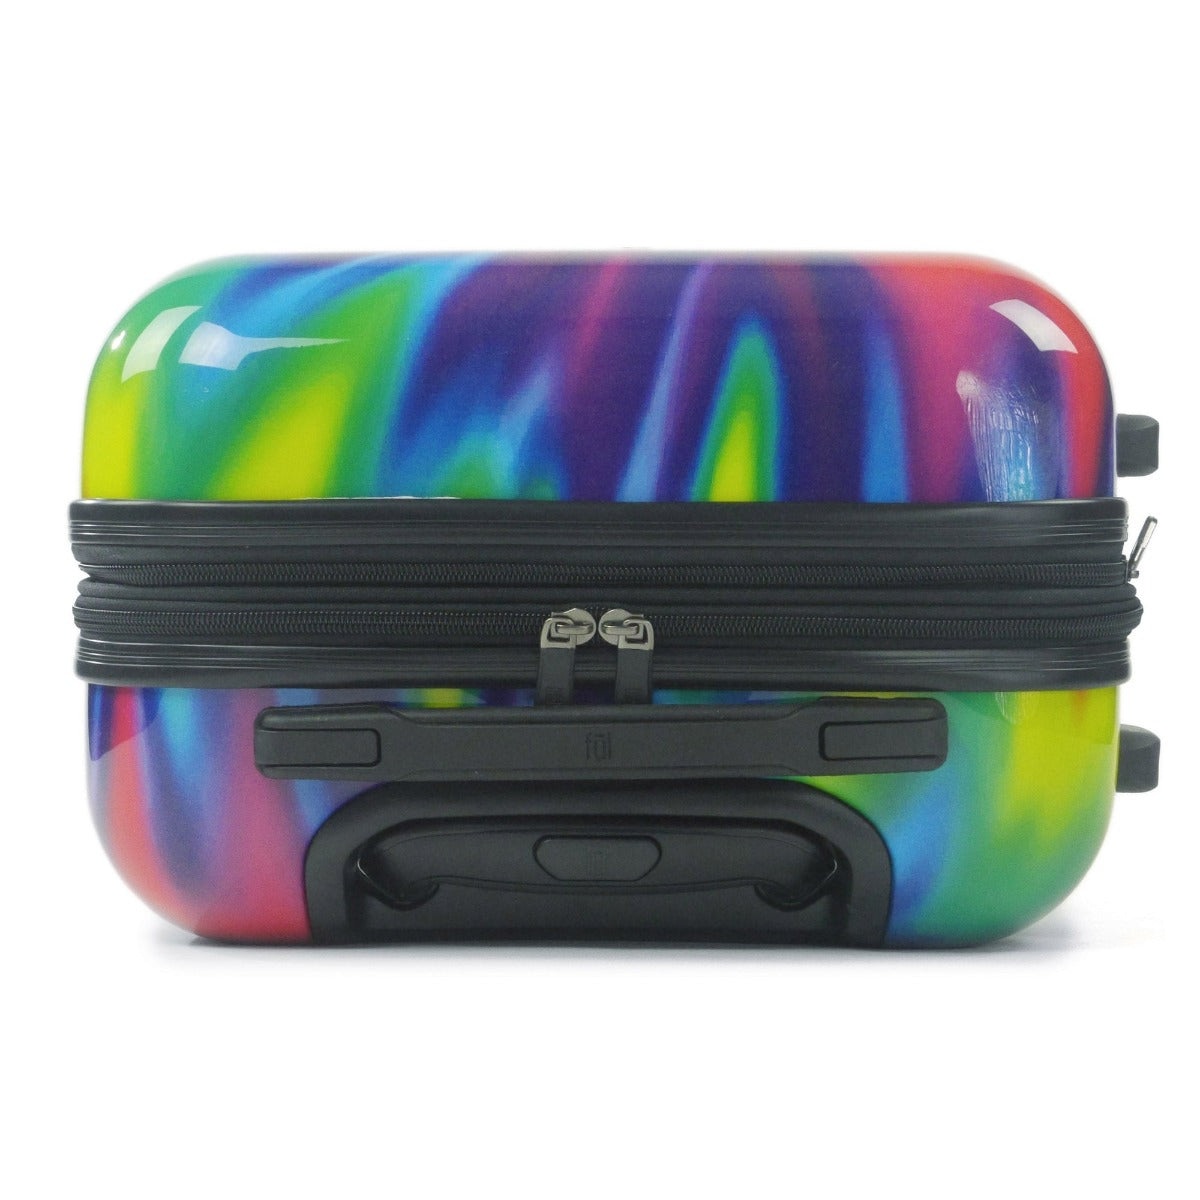 Tie dye Rainbow Swirl Suitcase Ful Hard sided 3 Pc Rolling Spinner Luggage Set 22 inch 24 inch 28 inch On Sale $50 off